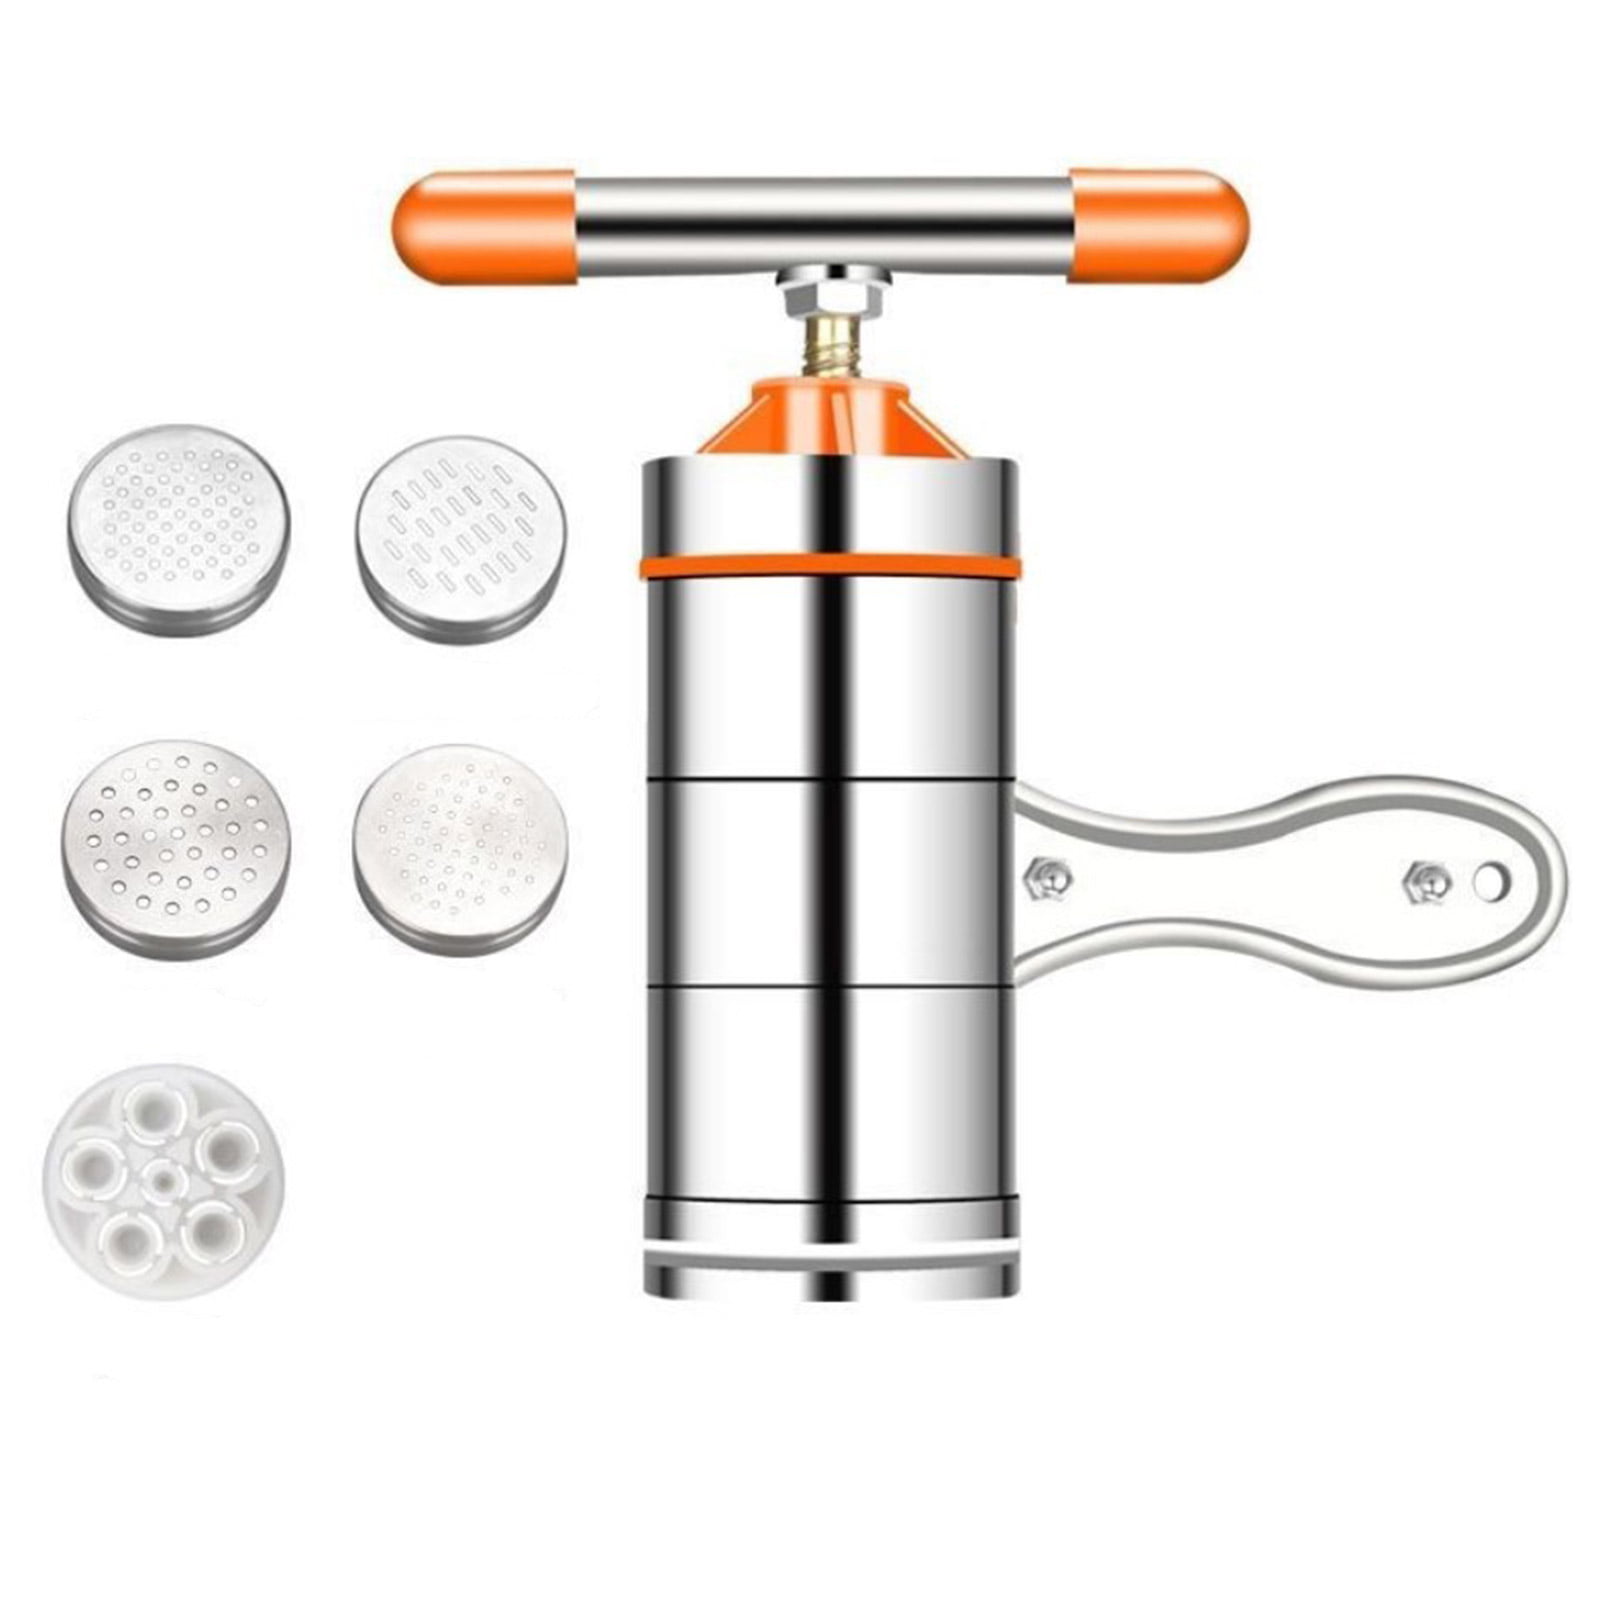 Dual-blade Multifunctional Stainless Steel Hand-cranking Noodle Making  Machine, Manual Cookie Maker, Suitable for Making Spaghetti, Ramen, Noodles,Lasagna,Holiday  Cookware Noodle Maker Machine